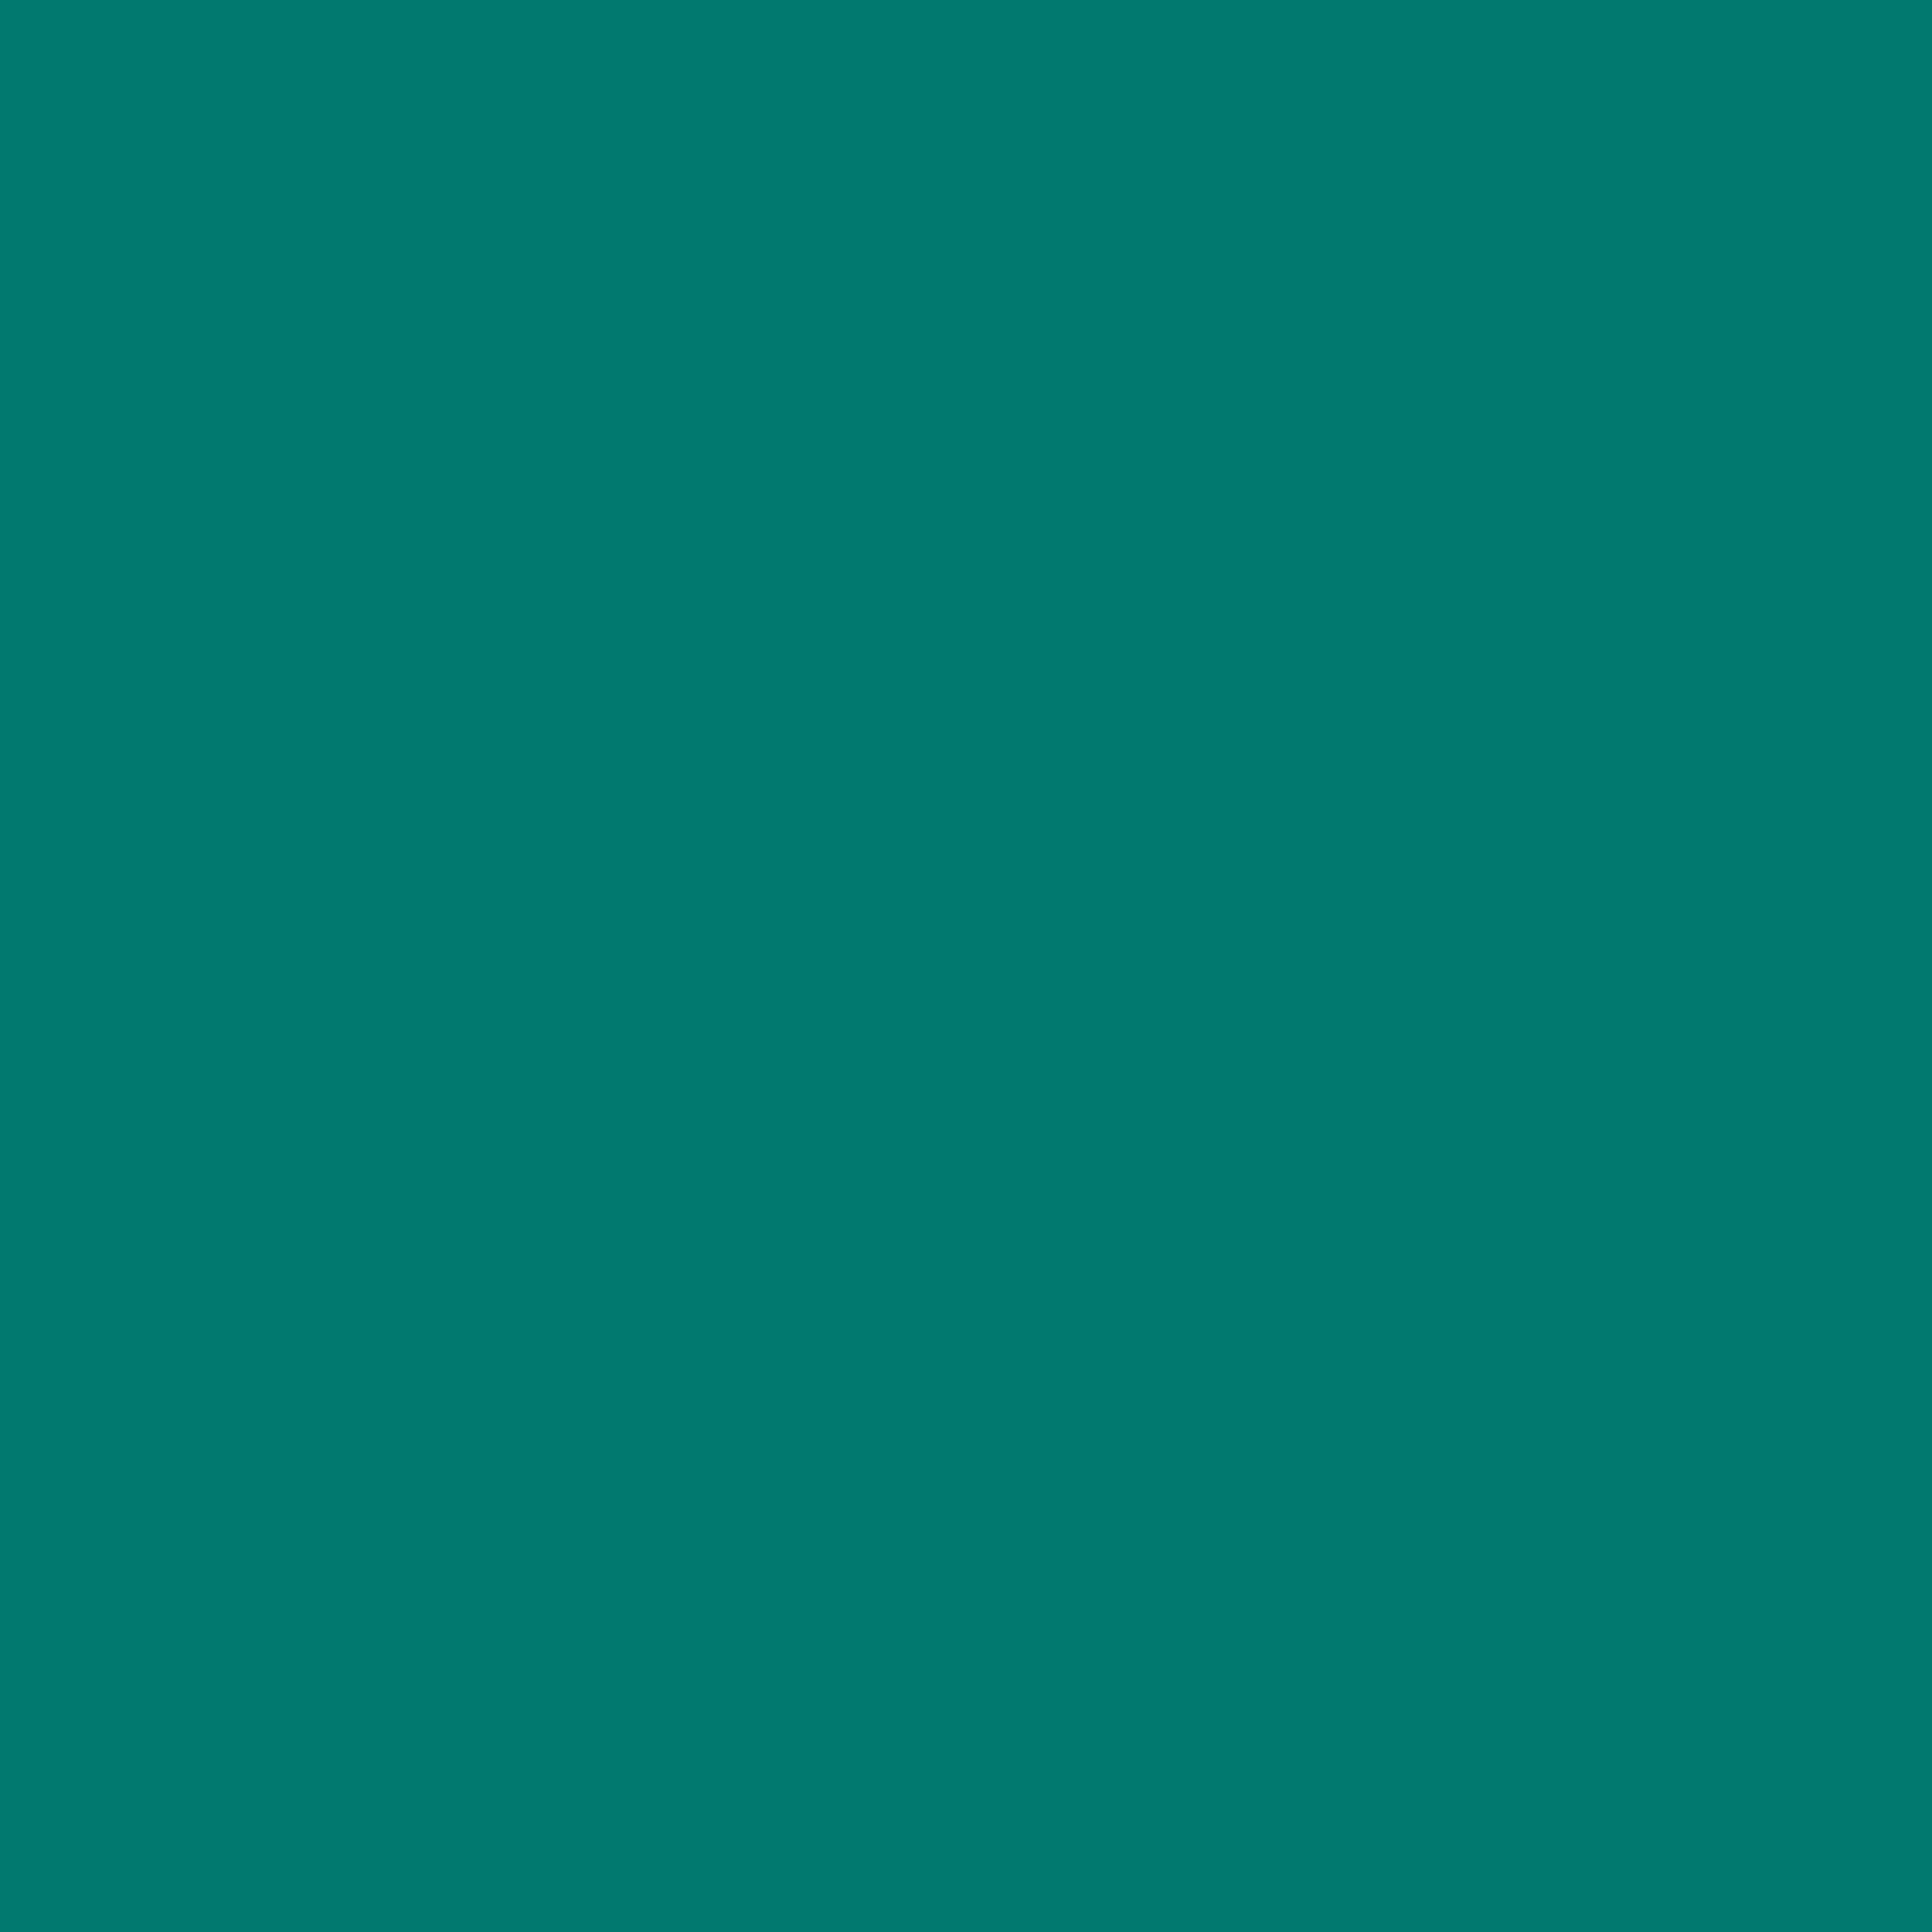 2732x2732 Pine Green Solid Color Background